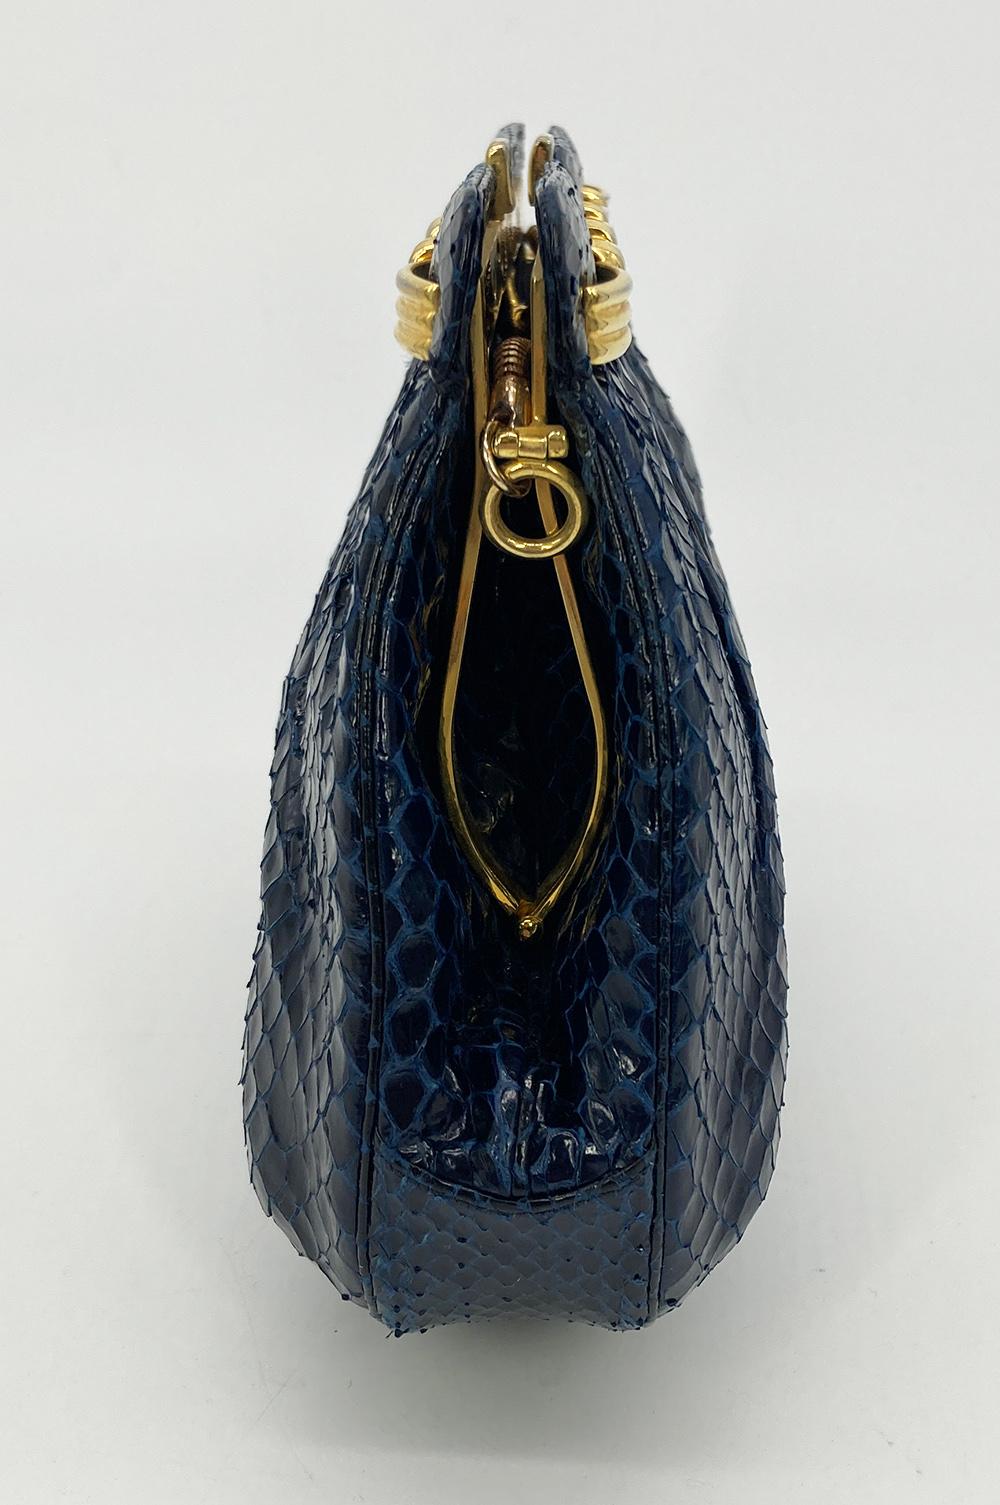 Judith Leiber Vintage Navy Snakeskin Clutch in very good condition. Navy snakeskin trimmed with gold hardware. Top kiss lock closure opens to a navy nylon interior with 2 side slit pockets. Overall very good condition. clean corners edges and